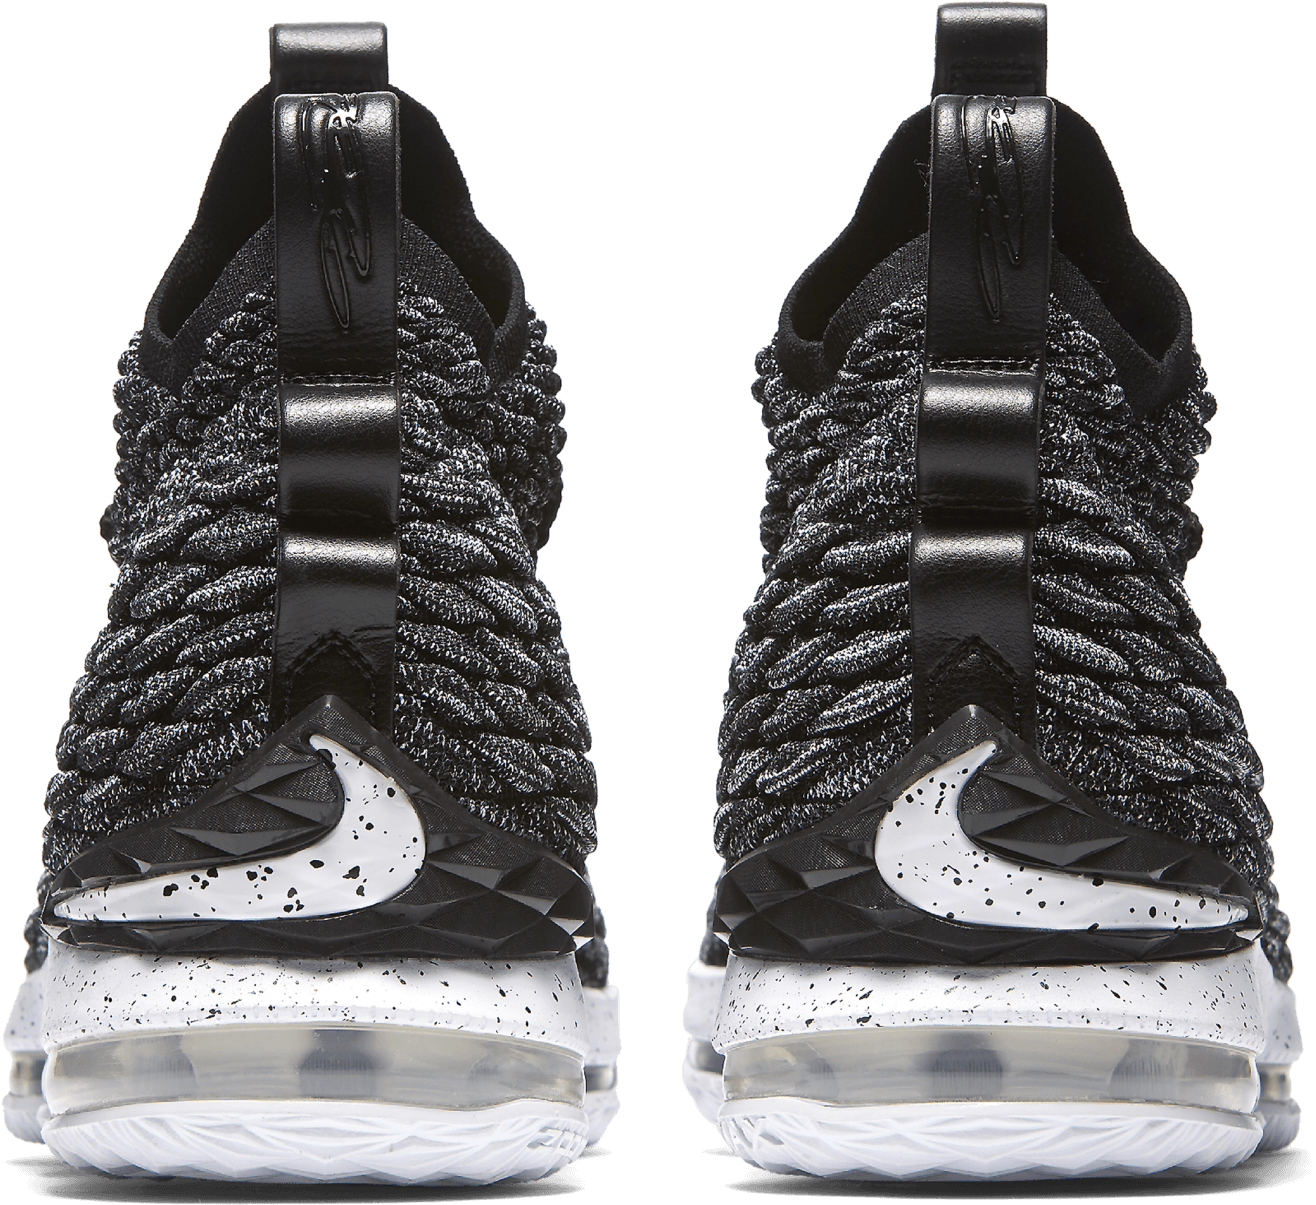 lebron 15 performance review